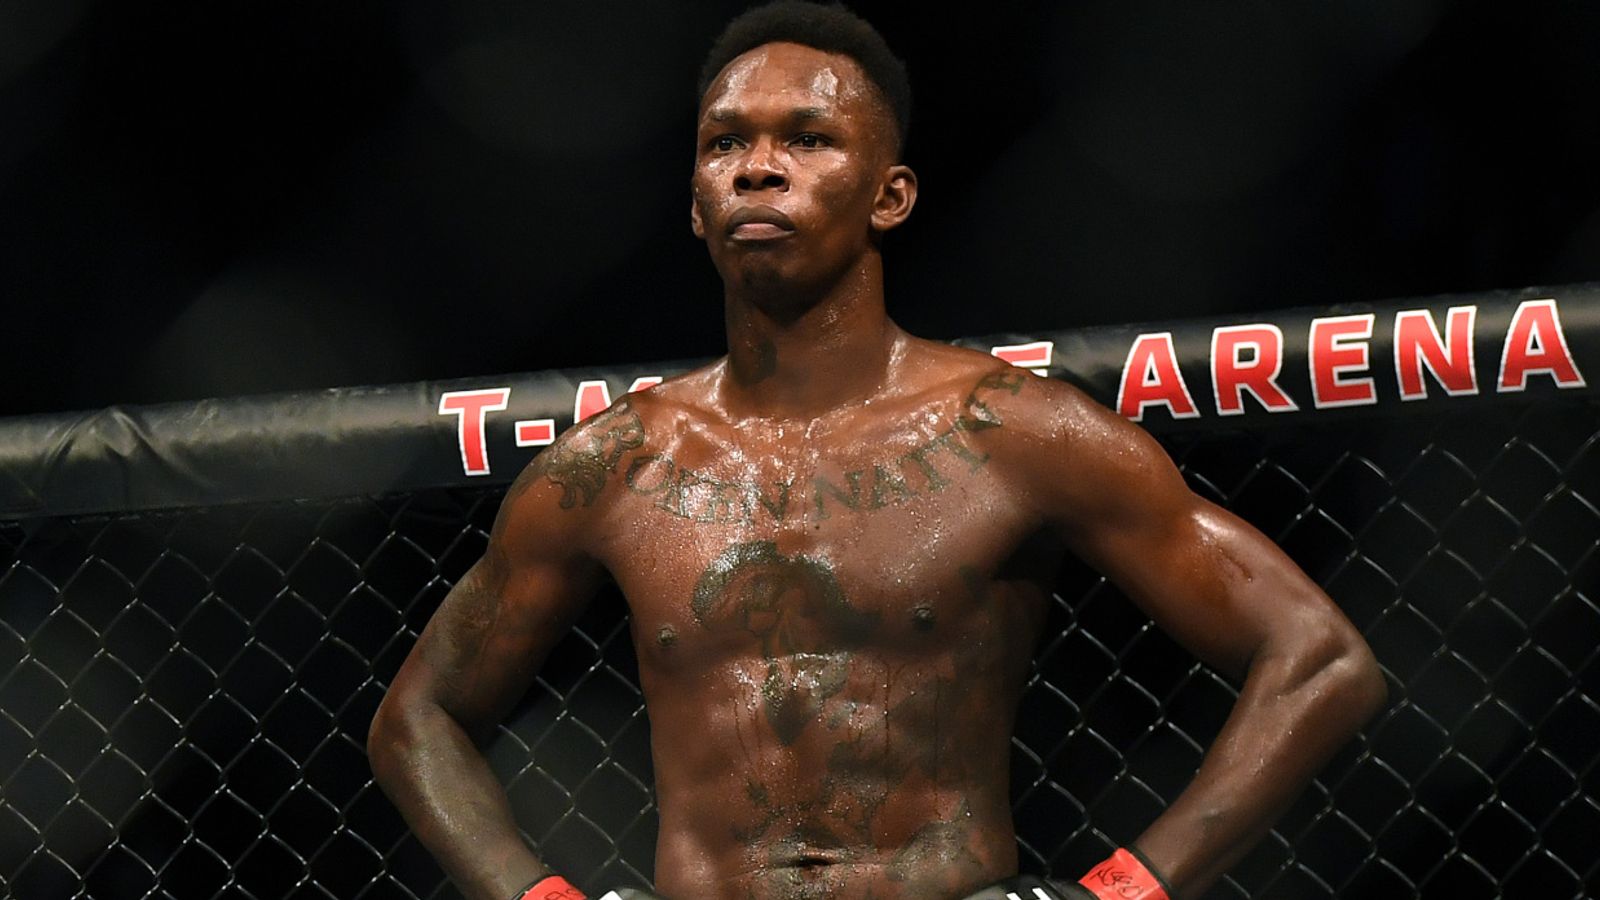 Ufc Star Israel Adesanya Arrested At New York Airport Over Illegal